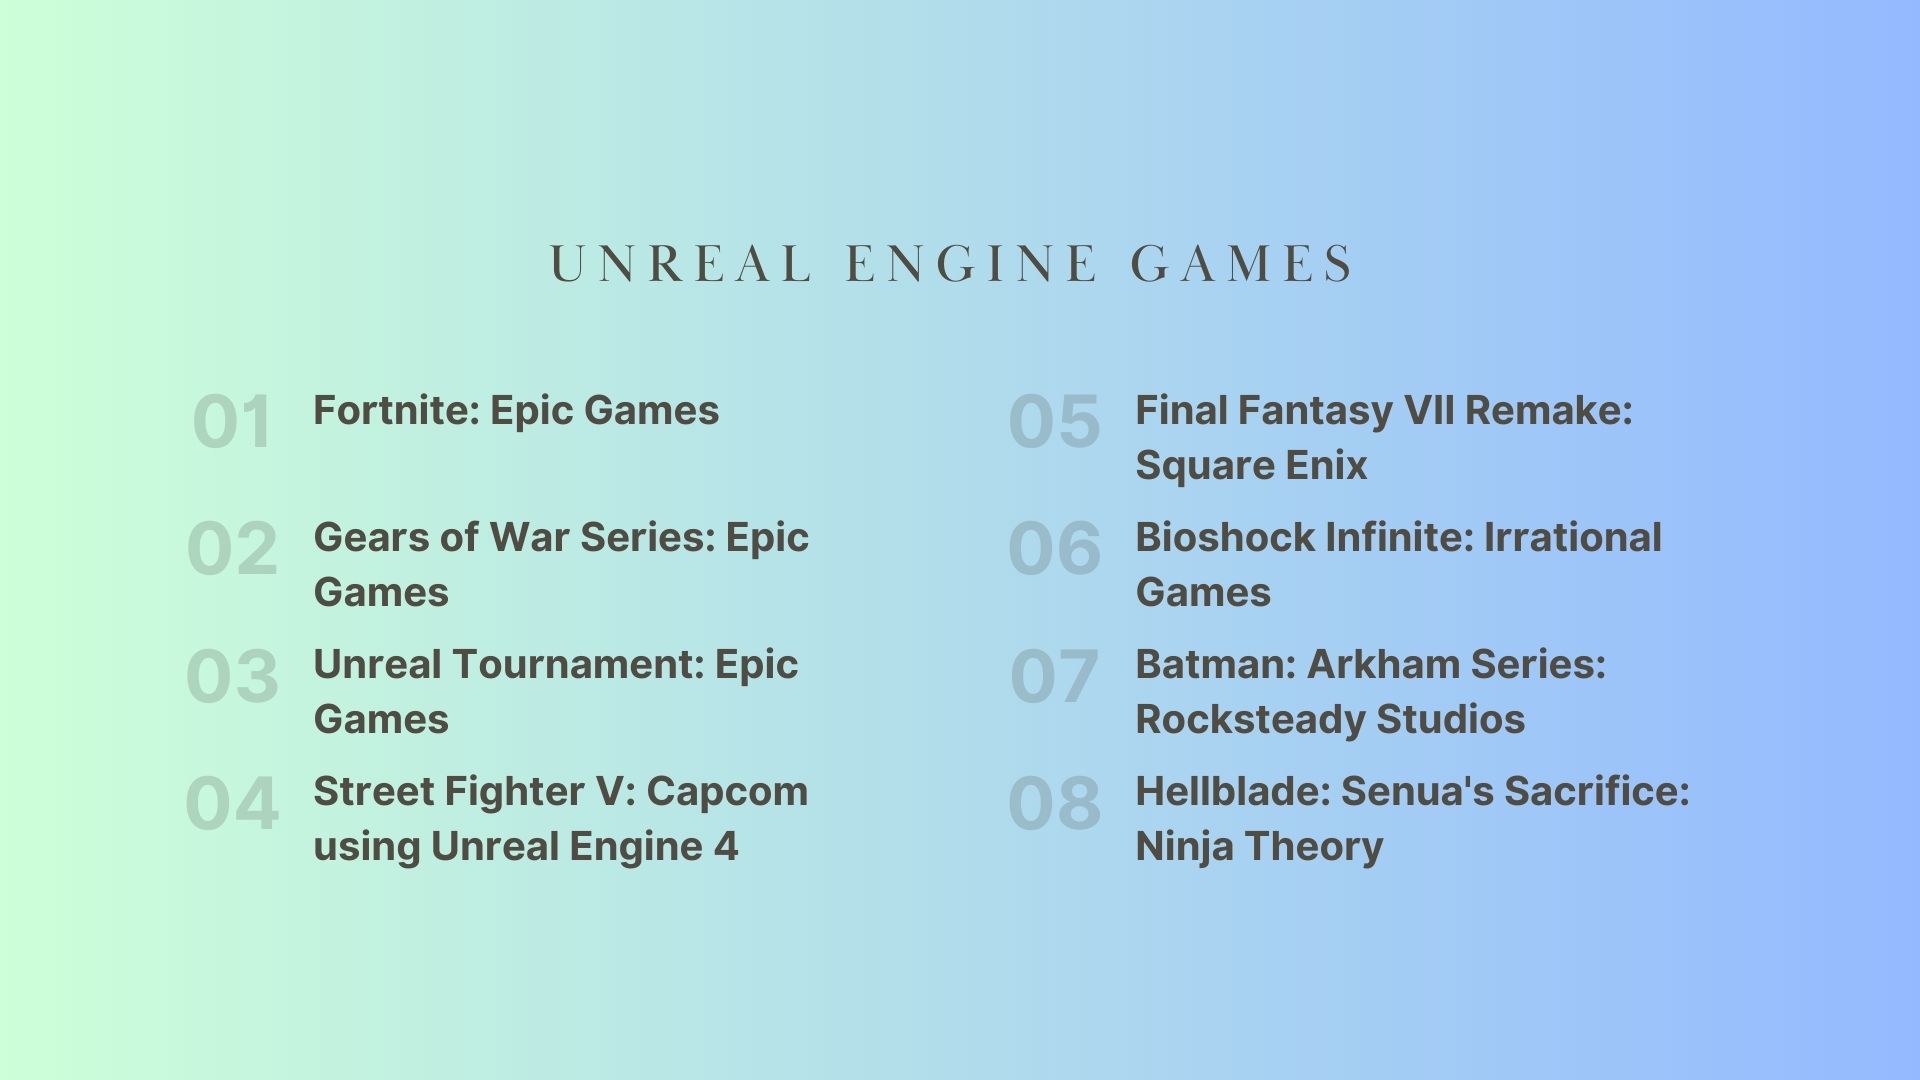 Games made with Unreal Engine